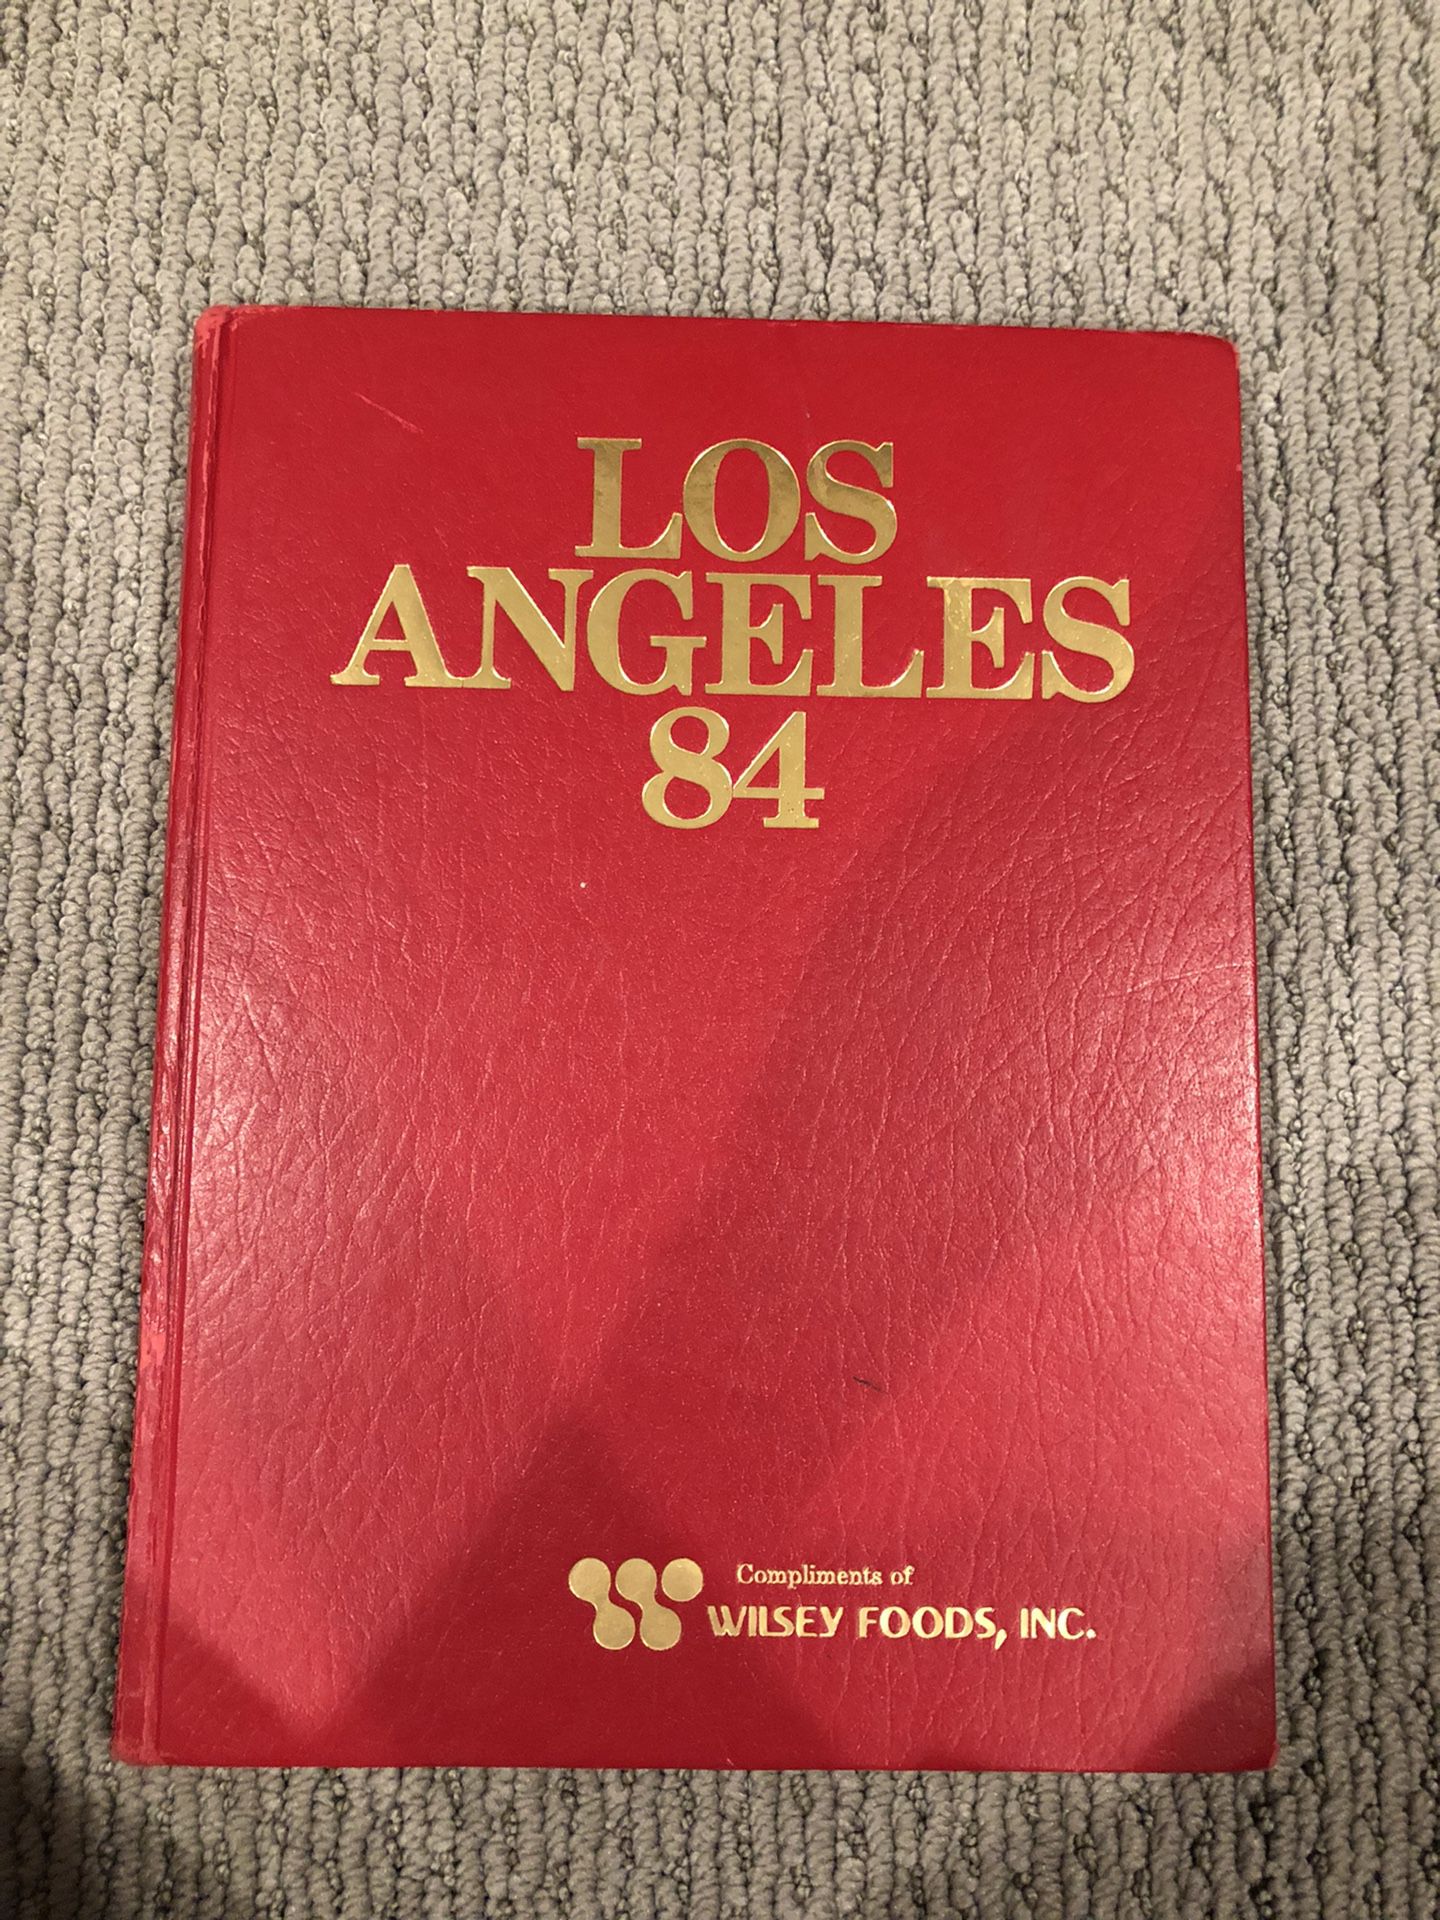 1984 Olympics Coffee Table Book - Los Angeles 